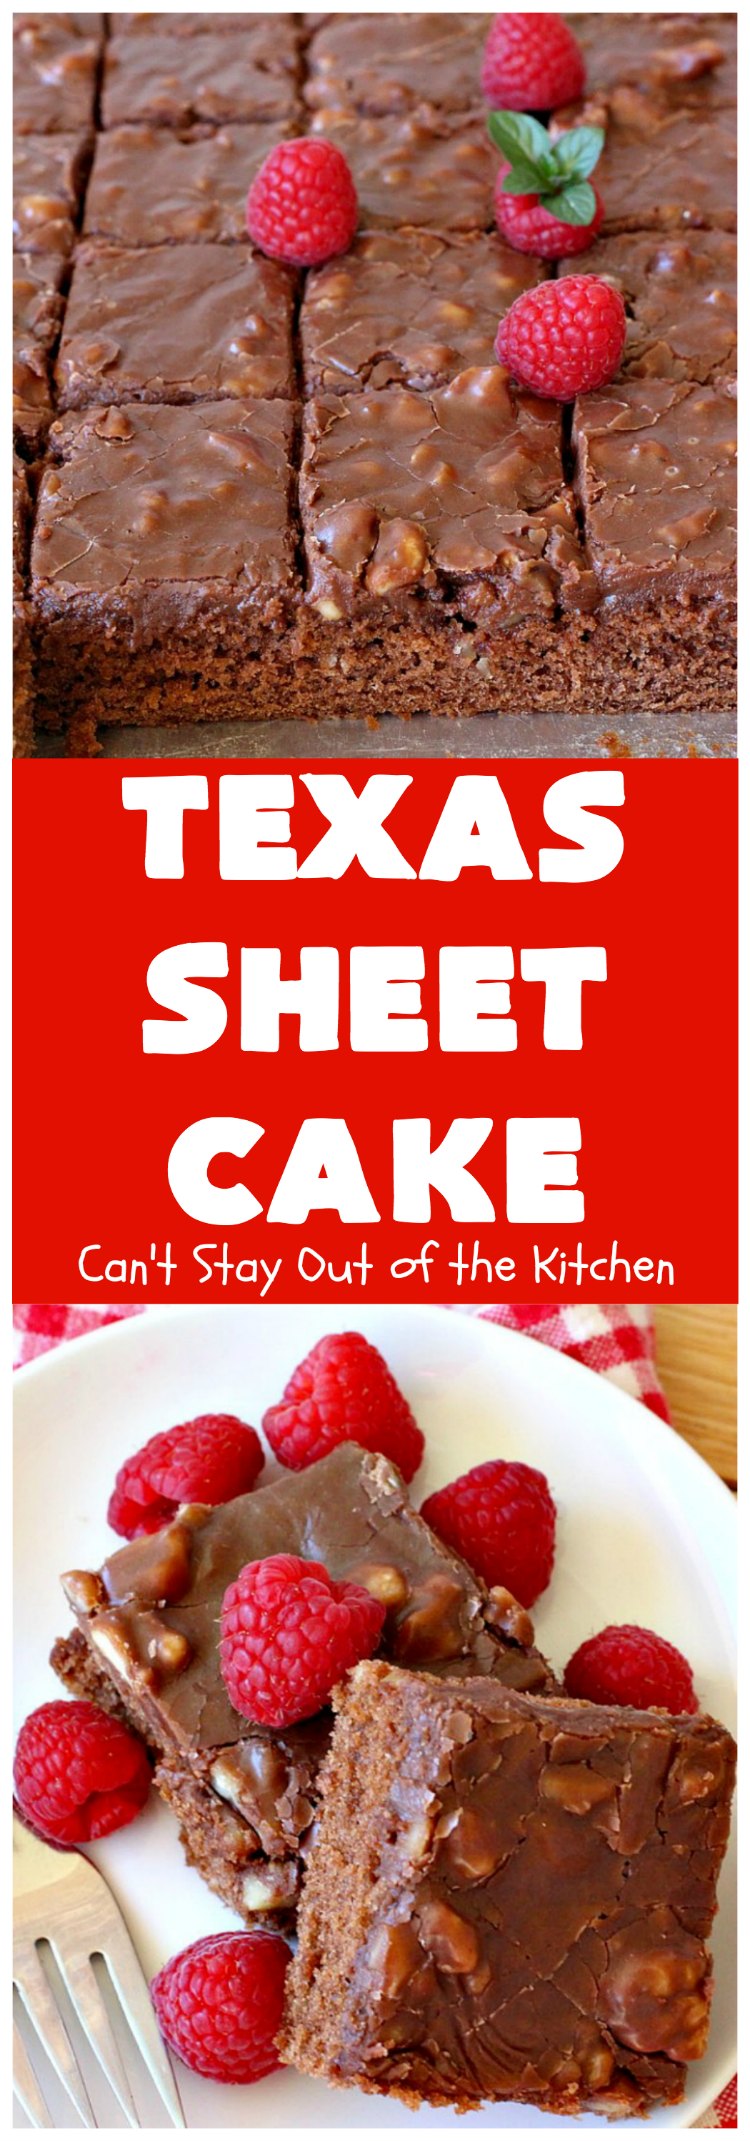 Texas Sheet Cake | Can't Stay Out of the Kitchen | this #ChocolateFudgeCake is divine! It's so chocolaty, so fudgy that you won't want to stop eating it! Perfect #dessert for #tailgating parties, potlucks or #holidays like #Easter or #MothersDay since it makes 48 servings! #cake #chocolate #fudge #walnuts #TexasSheetCake #SheetCake #ChocolateFudgeSheetCake 